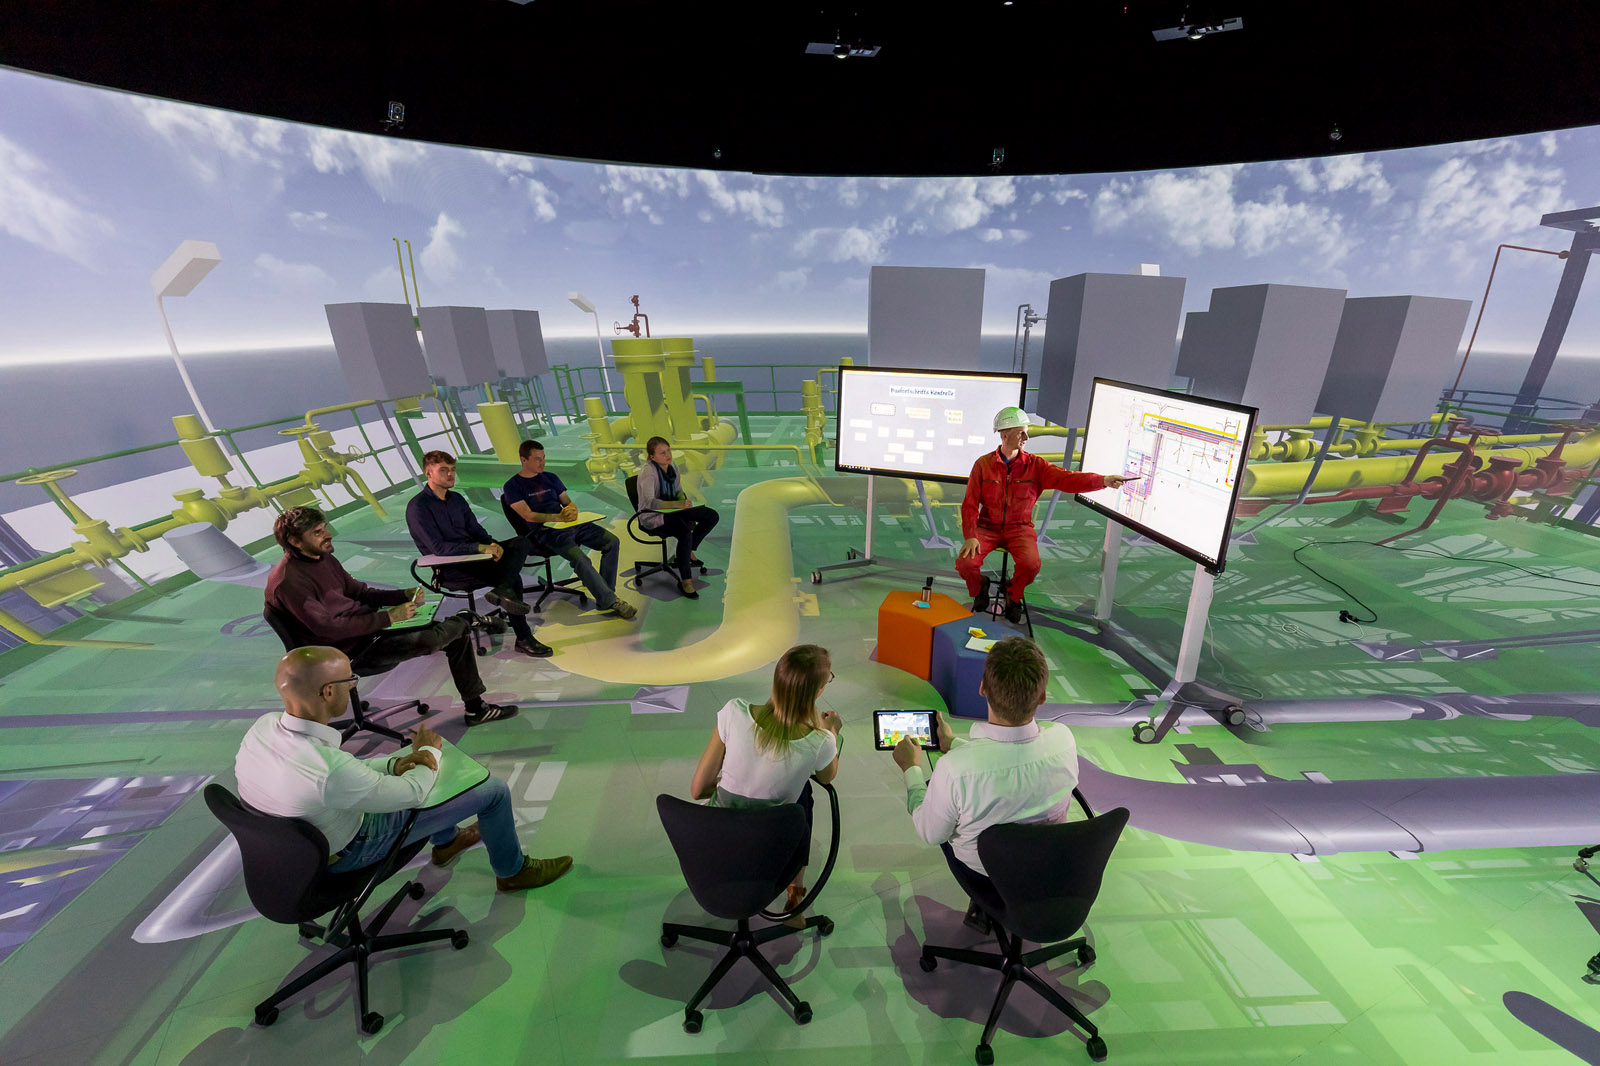 The Elbedom is simultaneously a discovery, learning and creative space and can improve communication with clientele effectively. Staff can be trained effectively and experts can share experiences in the virtual training environment.